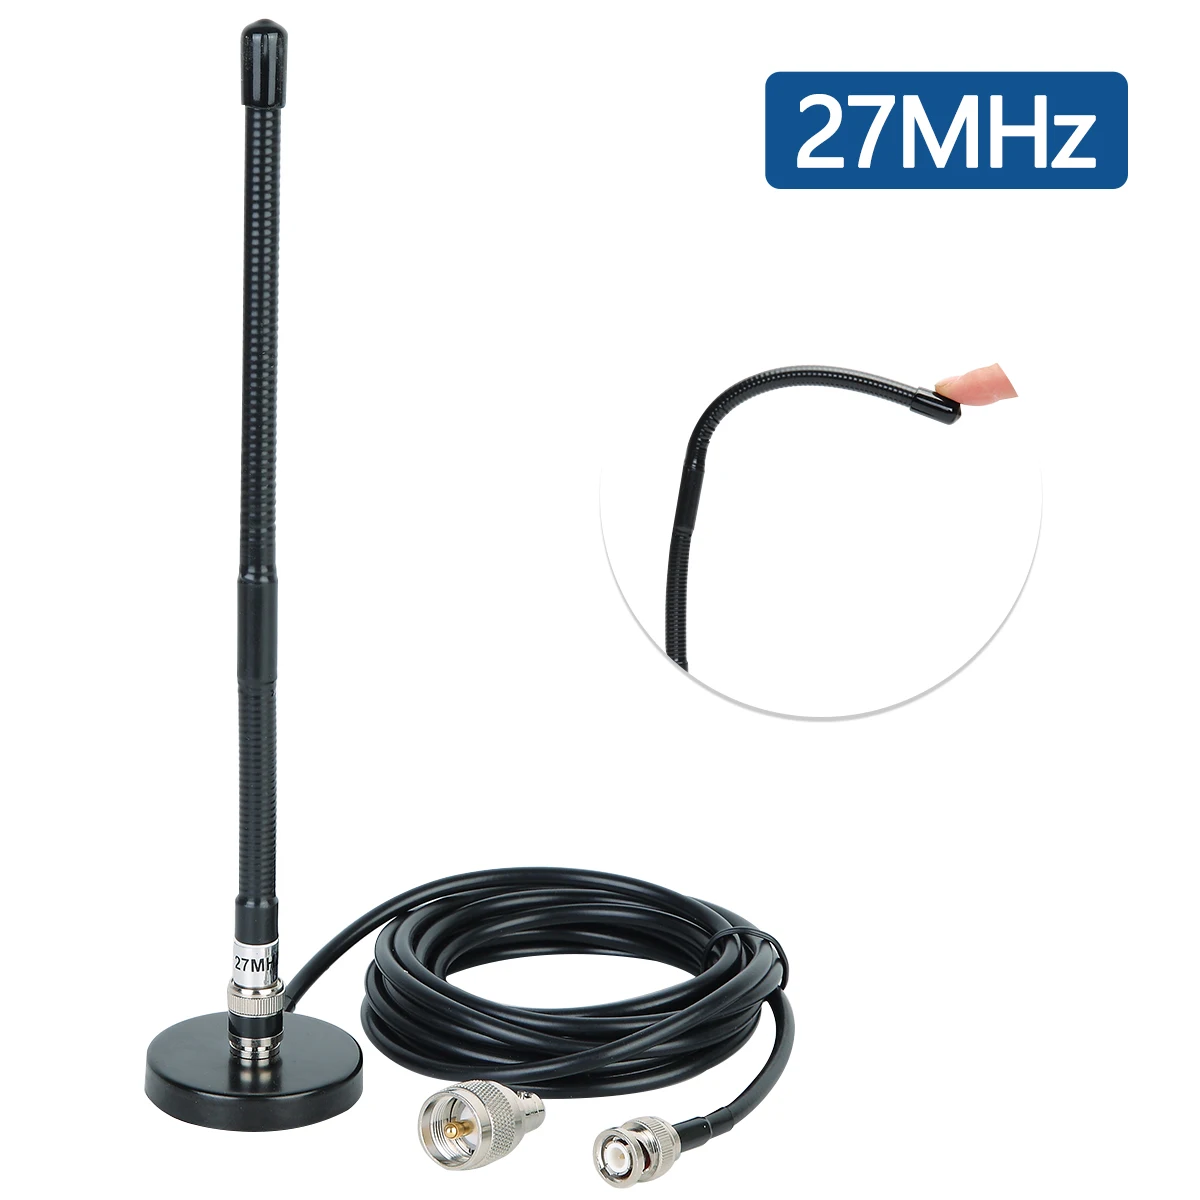 

CB Antenna 27MHz Soft Whip Magnetic Base with BNC&PL259 Male Connector for Cobra Midland Uniden Maxon President Car Mobile Radio